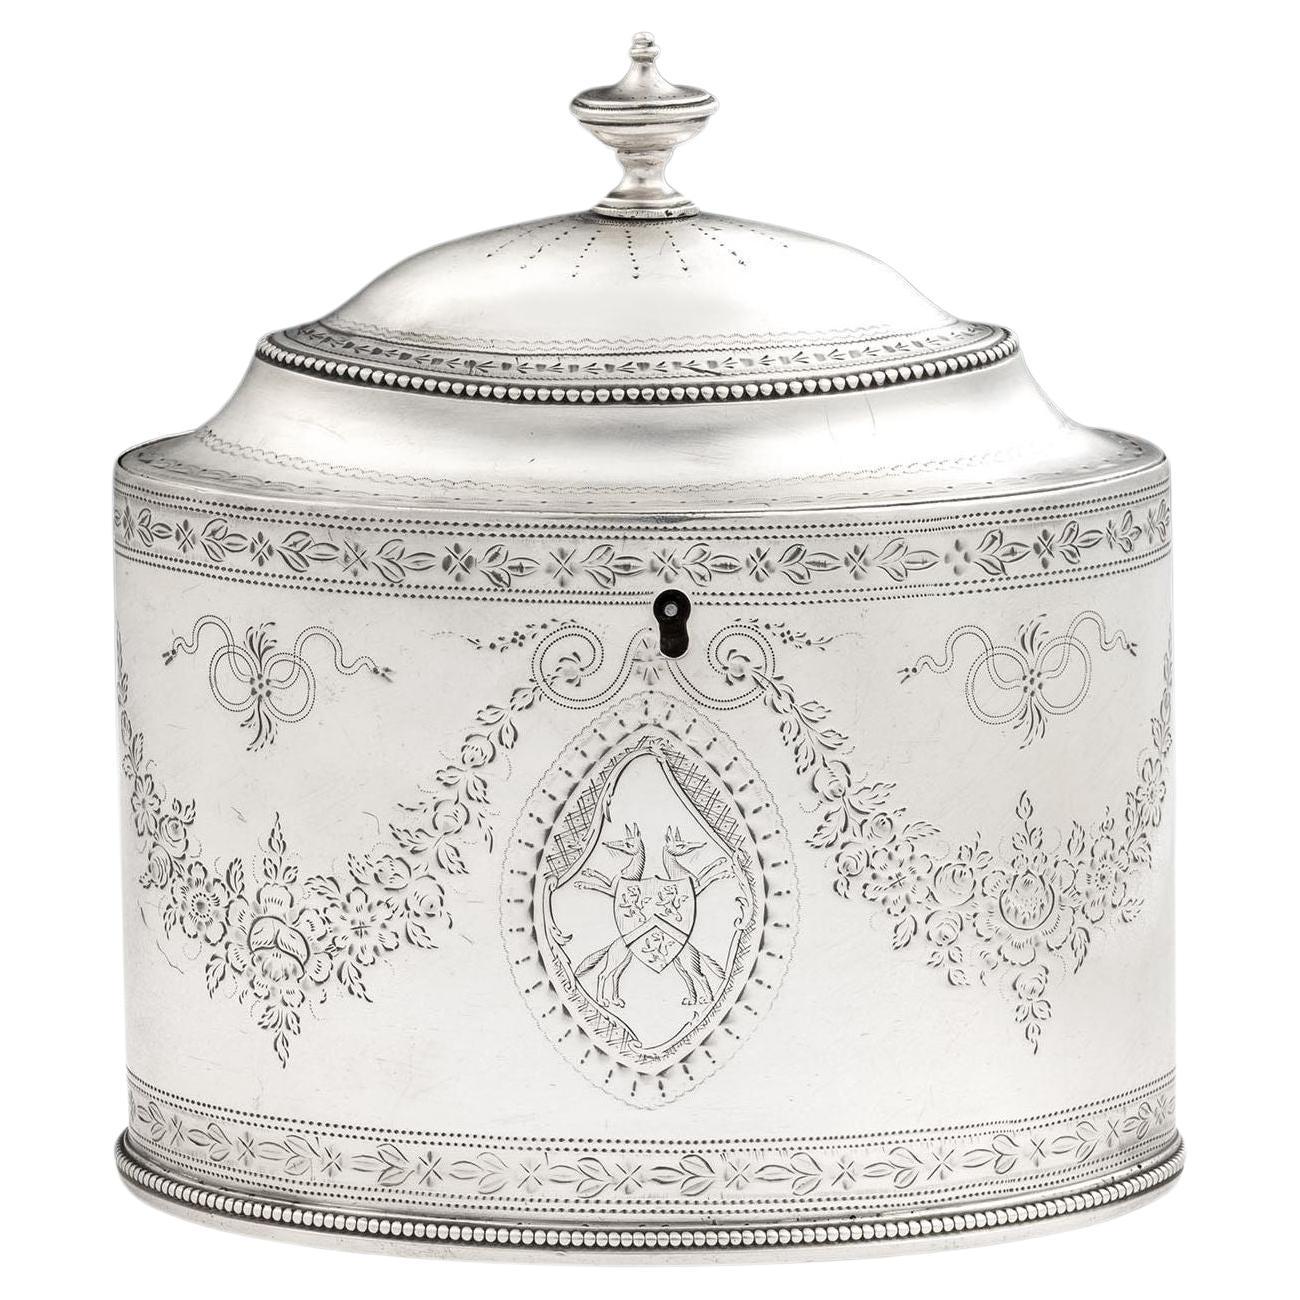 George III Sterling Silver Tea Caddy Made in London by Hester Bateman in 1787 For Sale